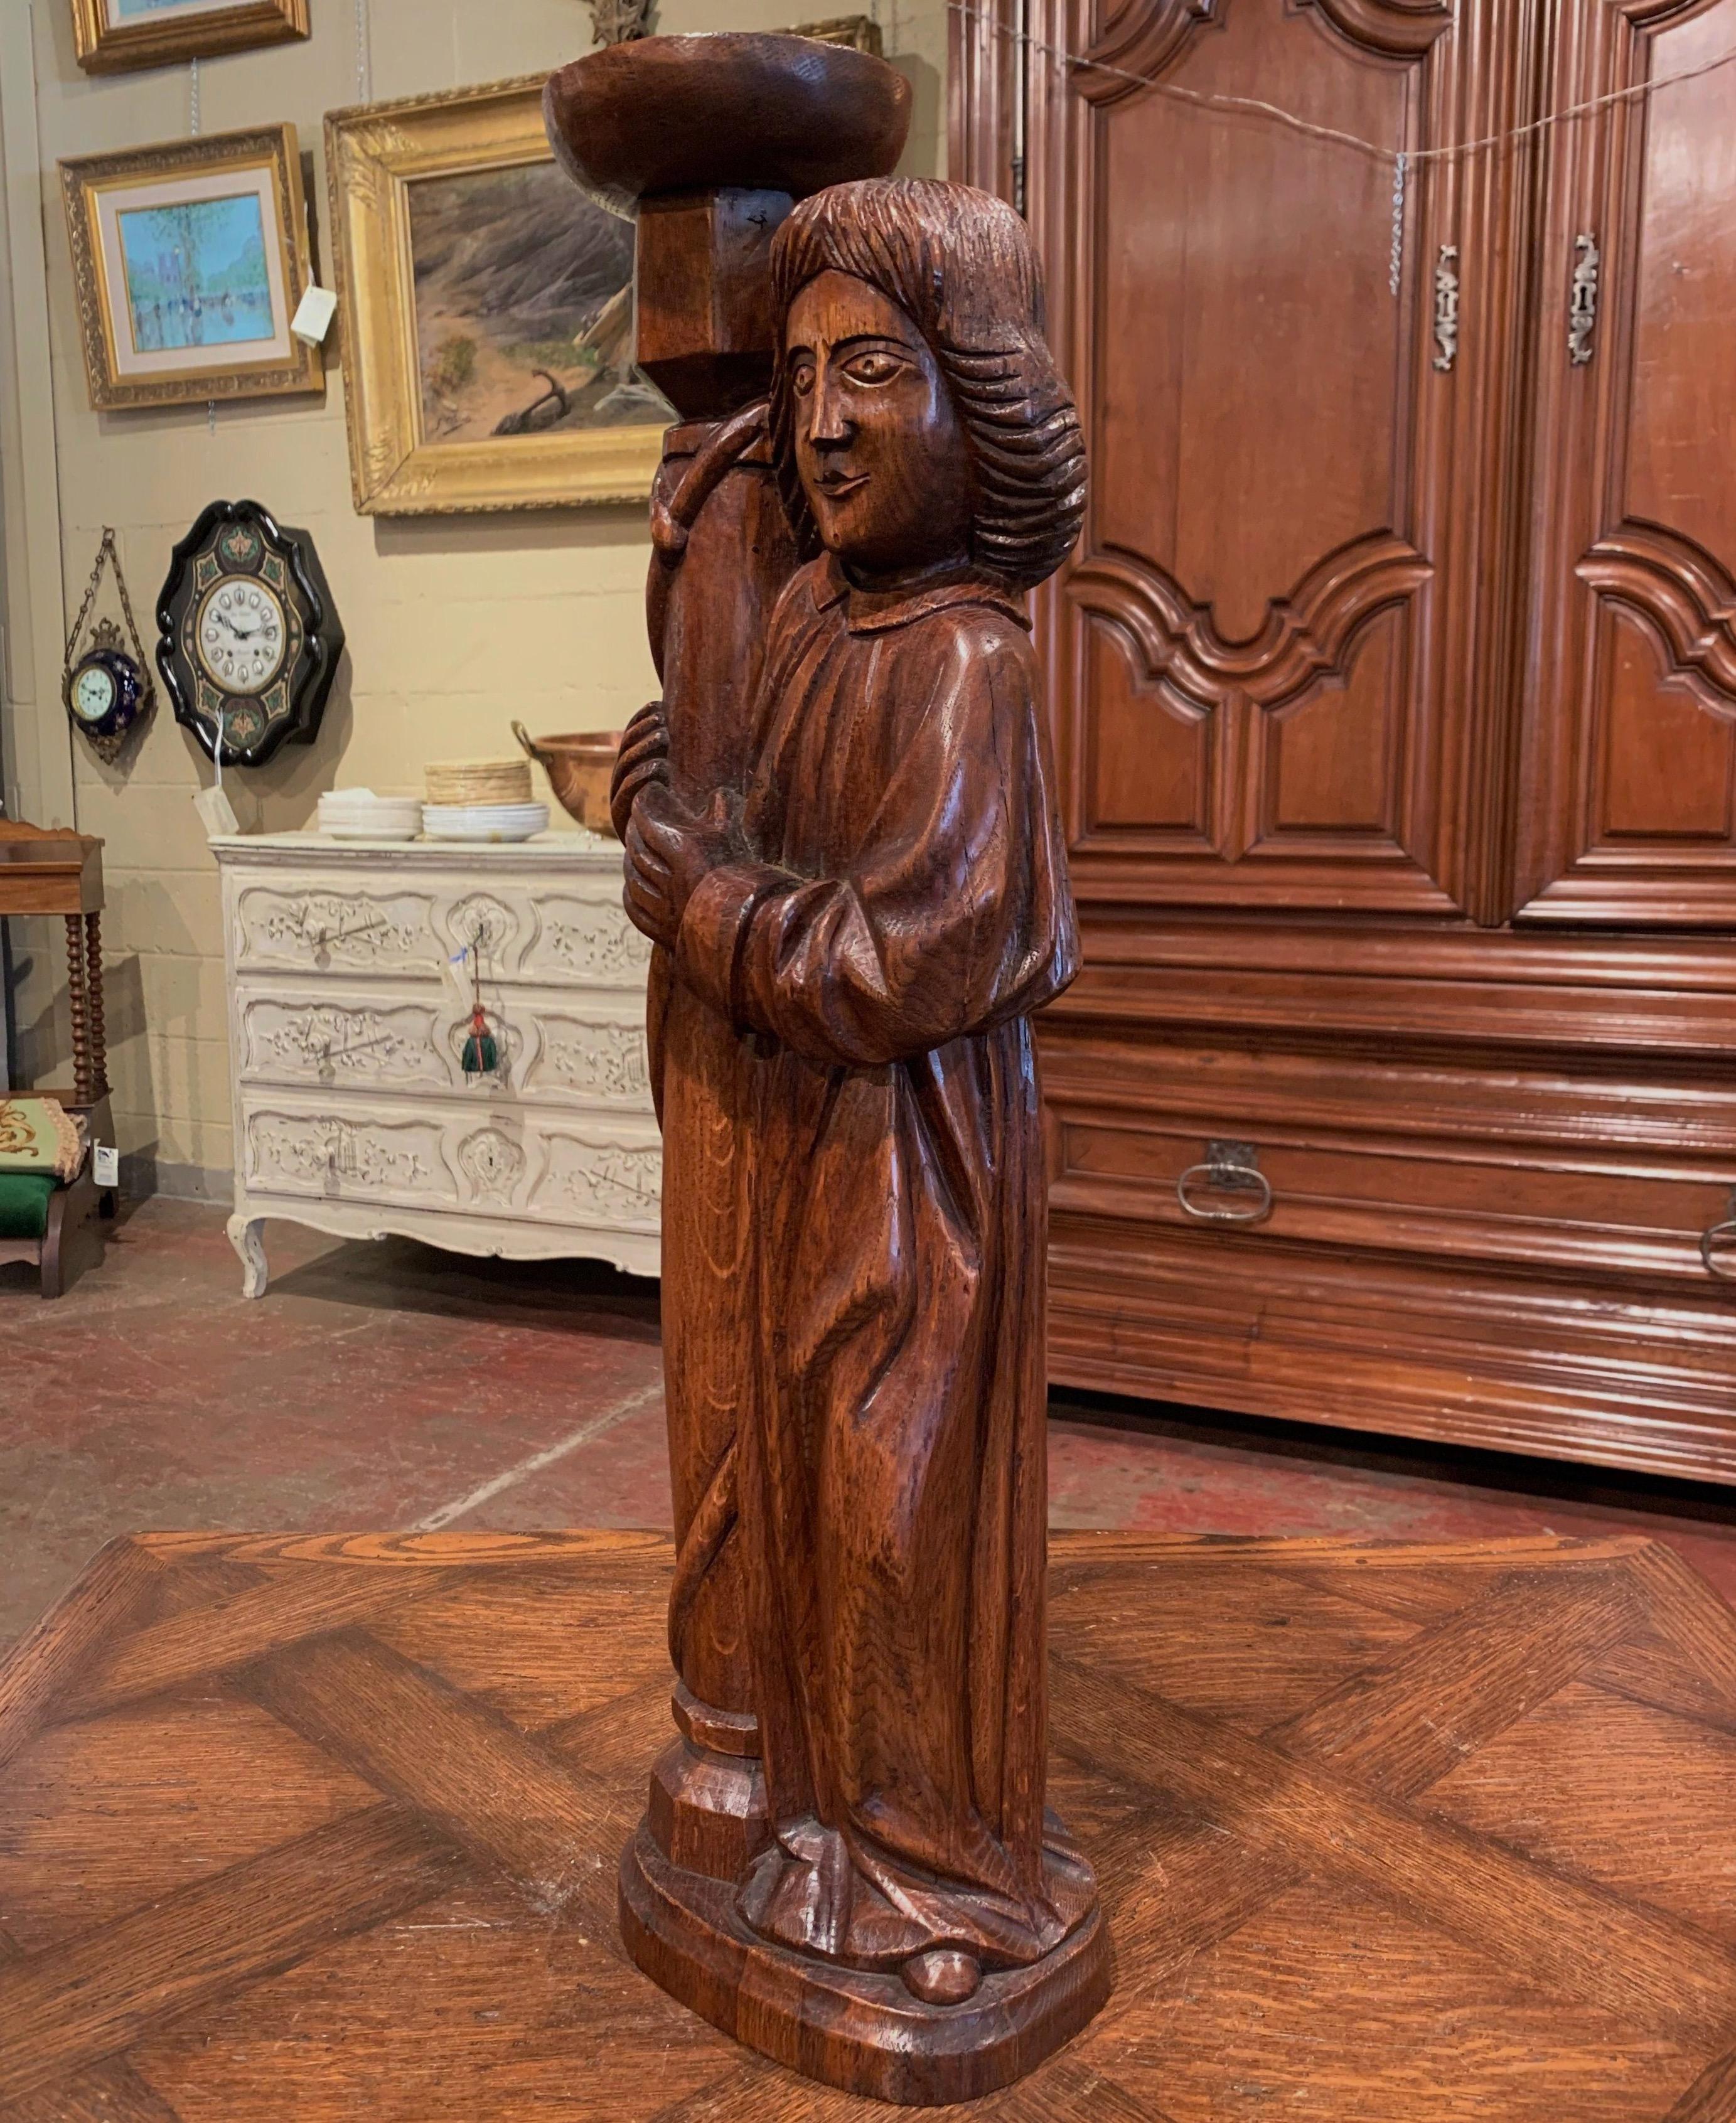 This large antique wood carved sculpture composition was crafted in France circa 1950; made of oakwood, the statue depicts a church page or altar server holding a torch. The top for the candlestick is curved in order to hold a candle. The carved